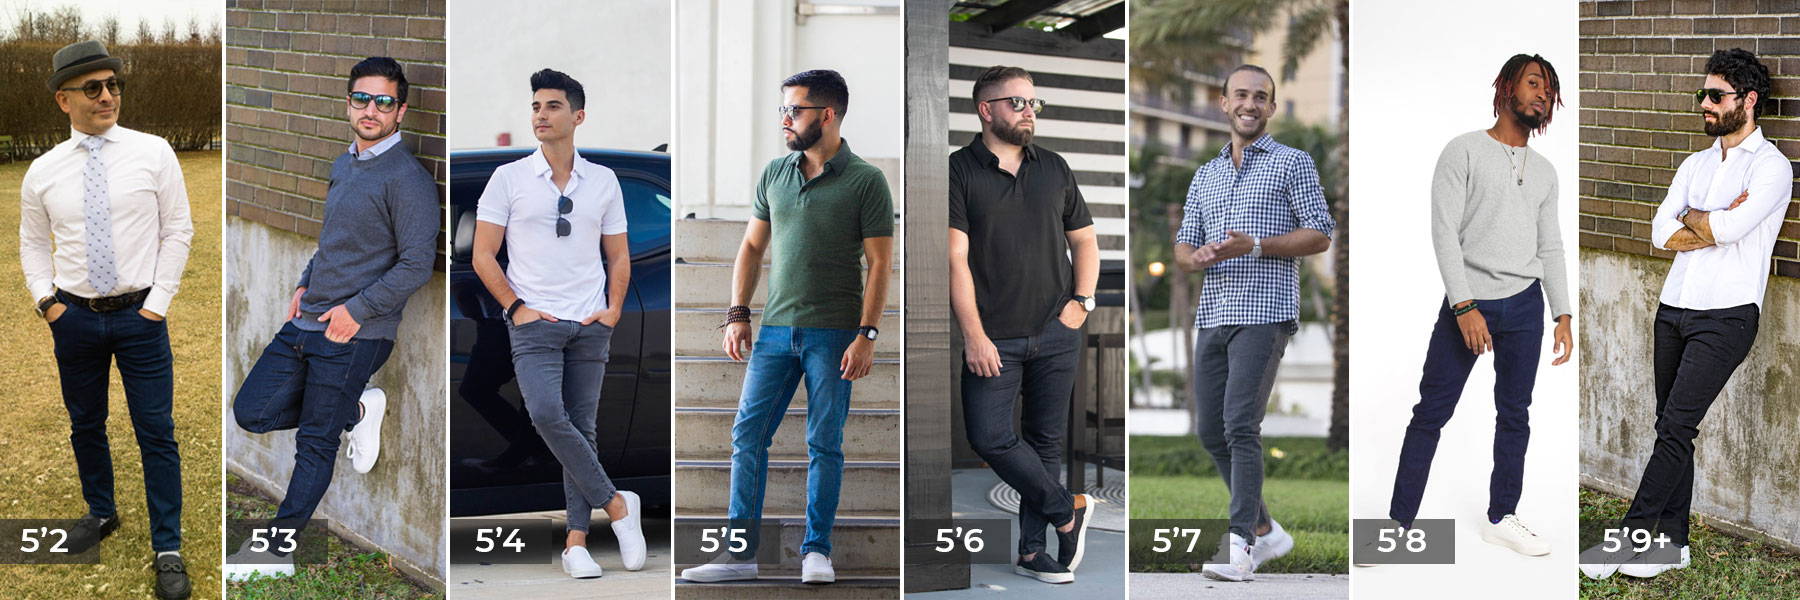 Shop By Height, Clothes for Short Men